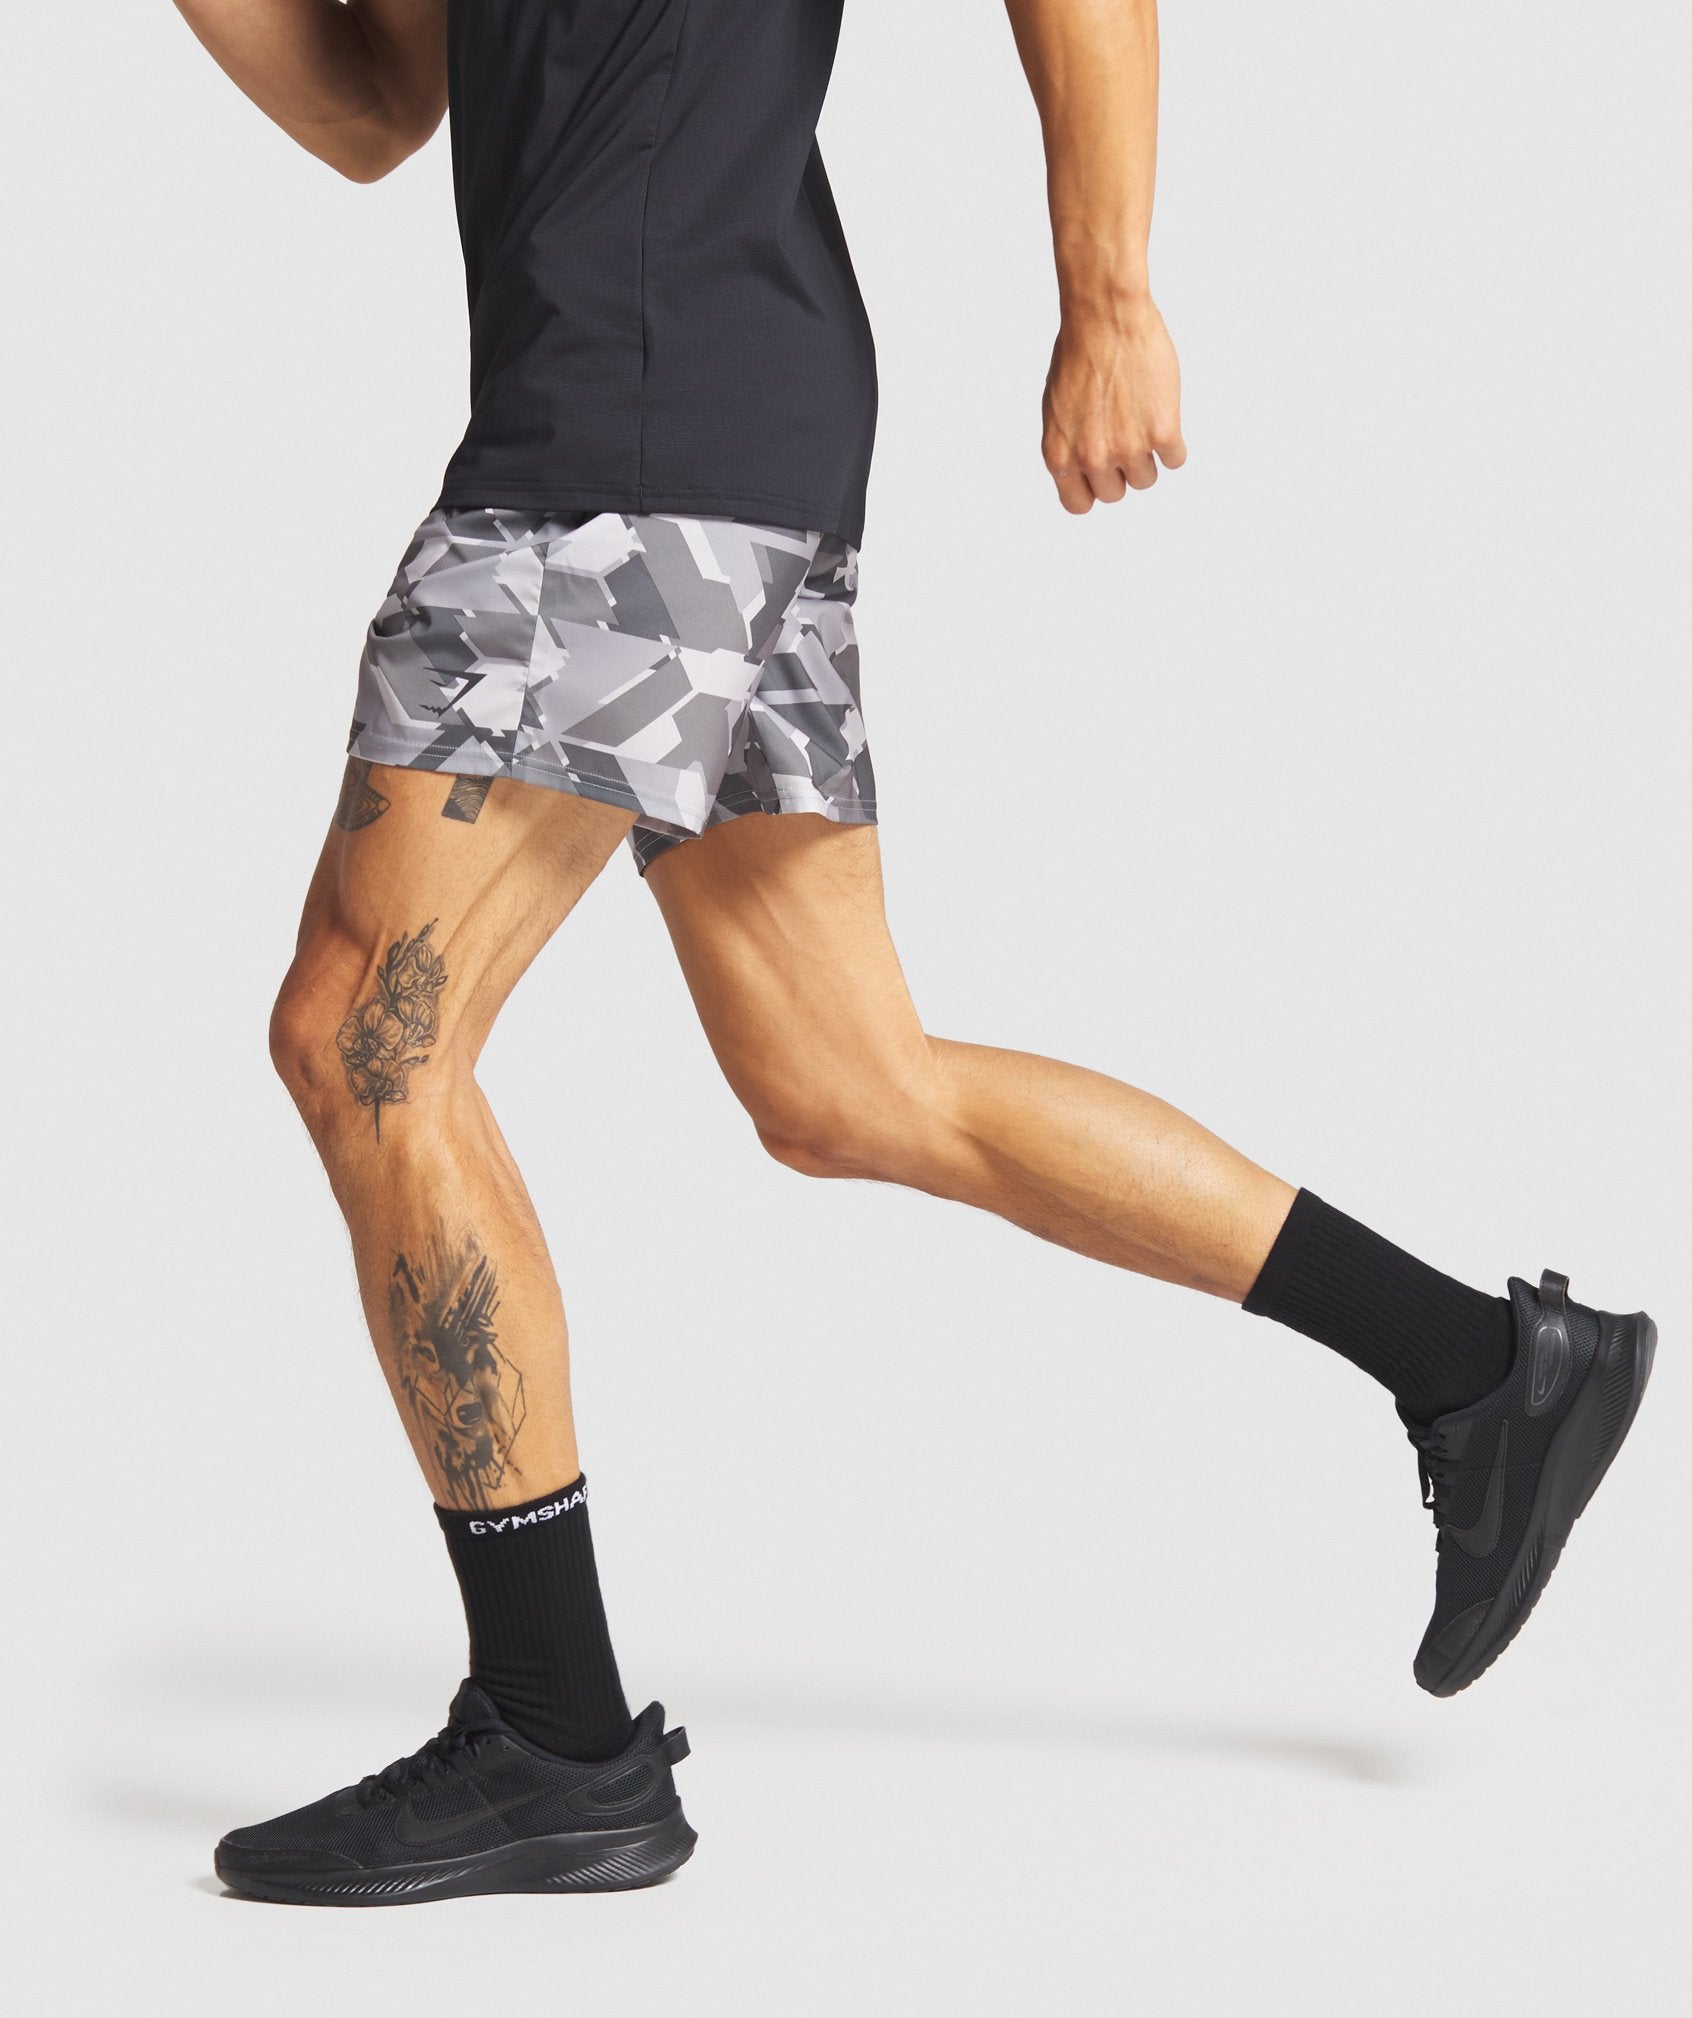 Arrival Zip Pocket Shorts in Camo - view 4